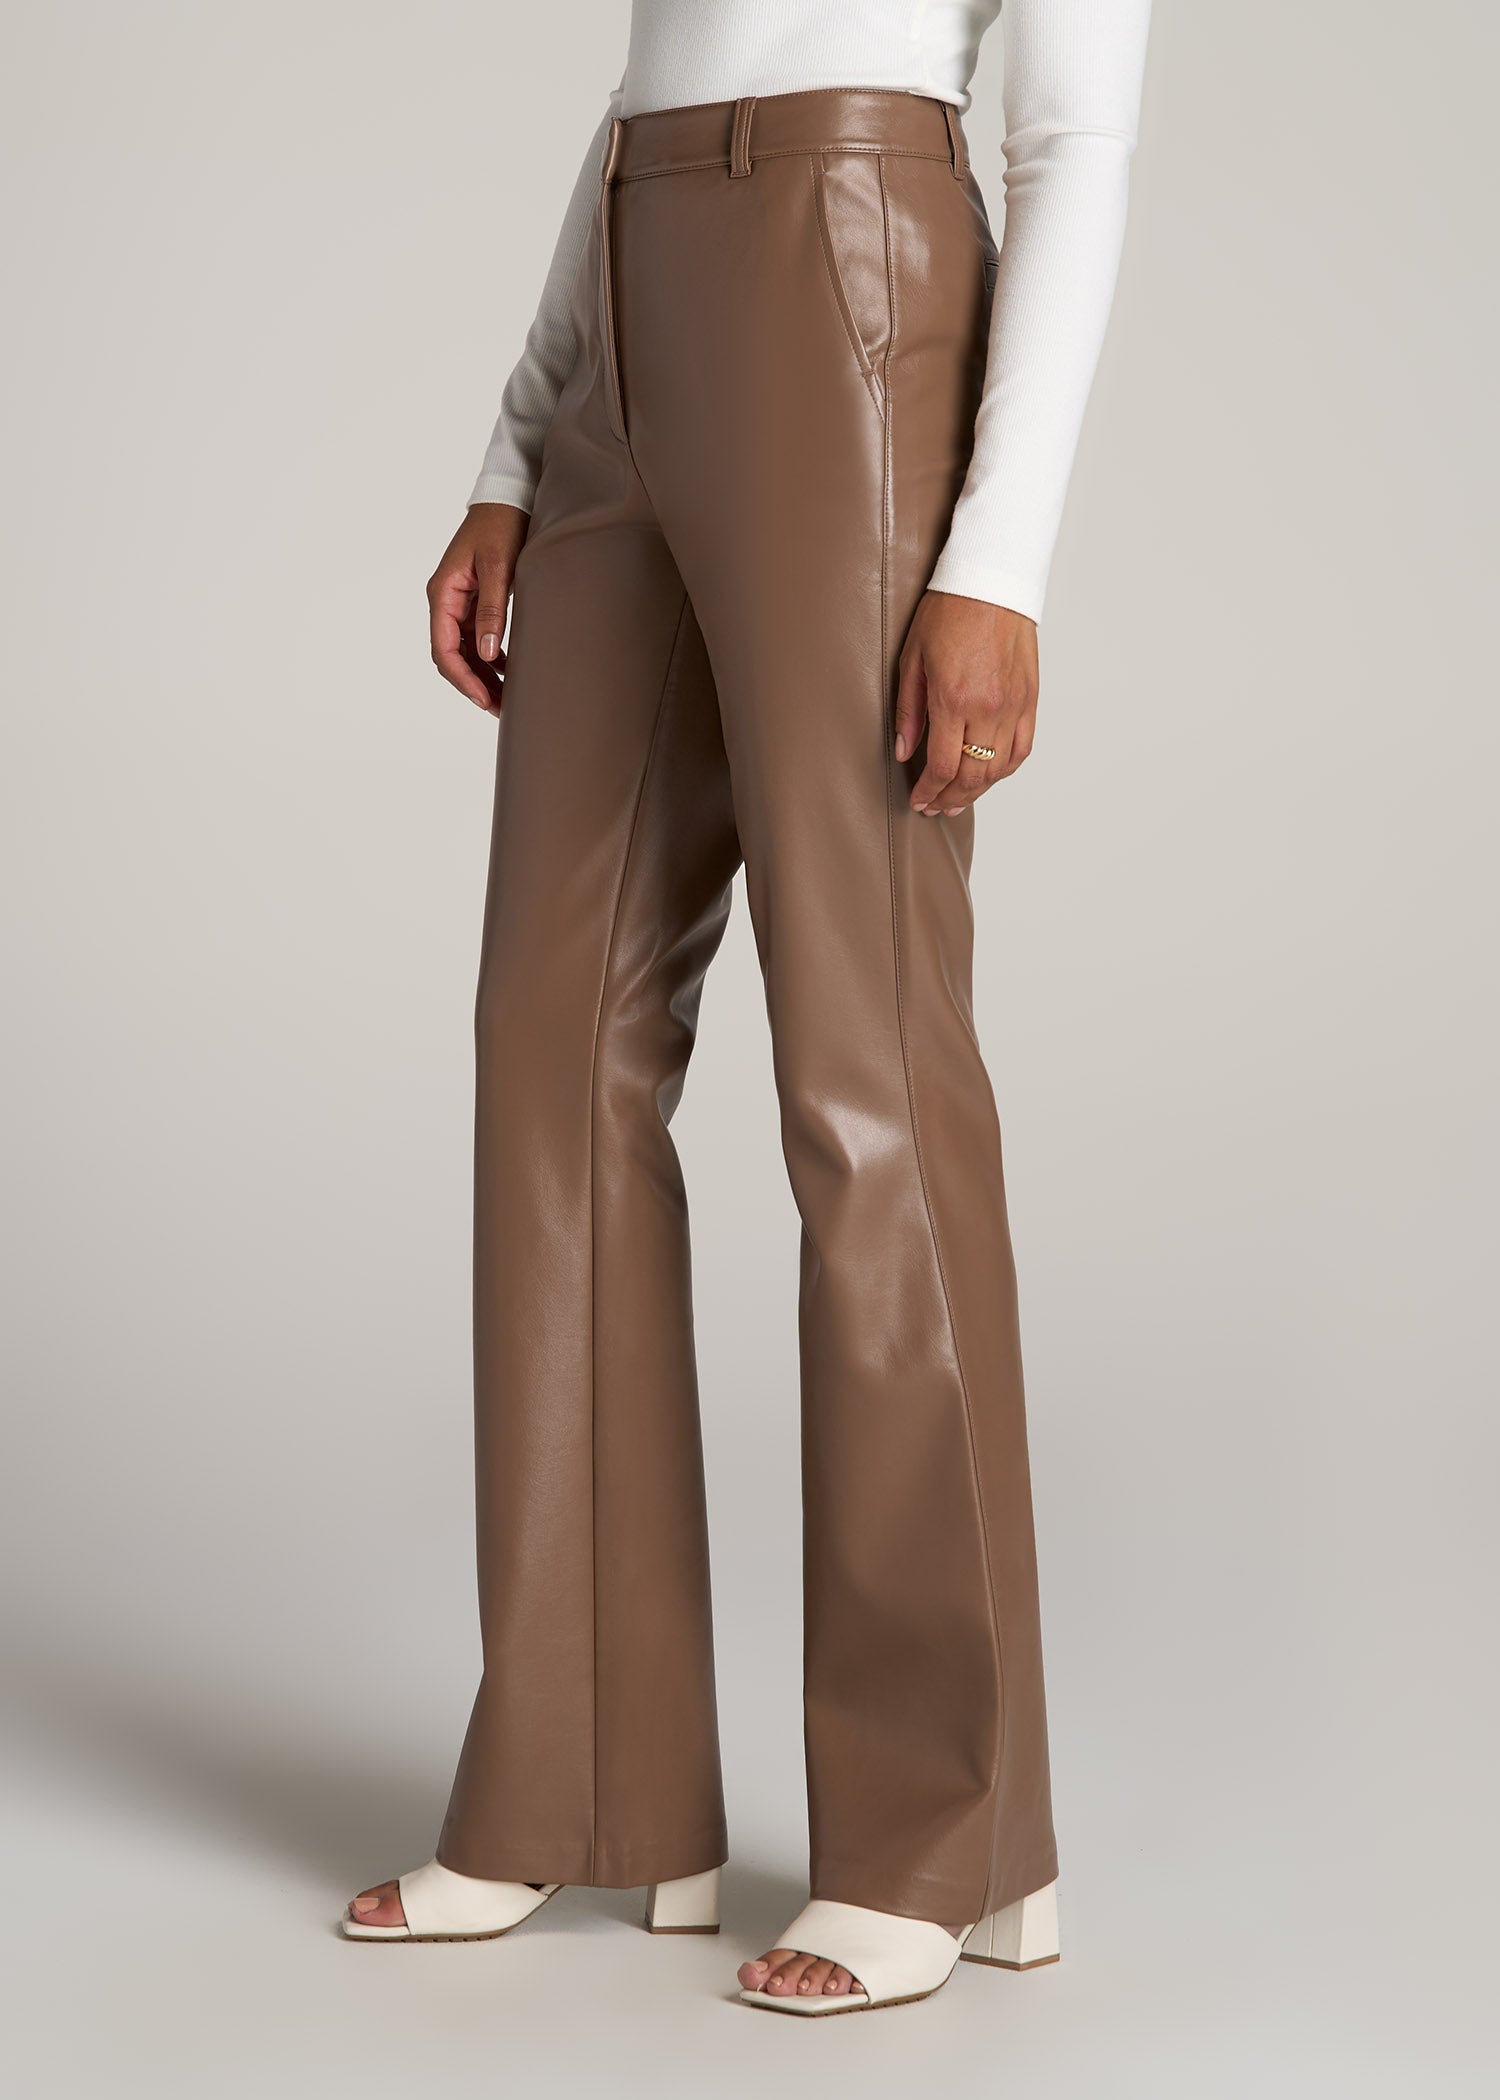 High-rise flared leather pants in brown - Alessandra Rich